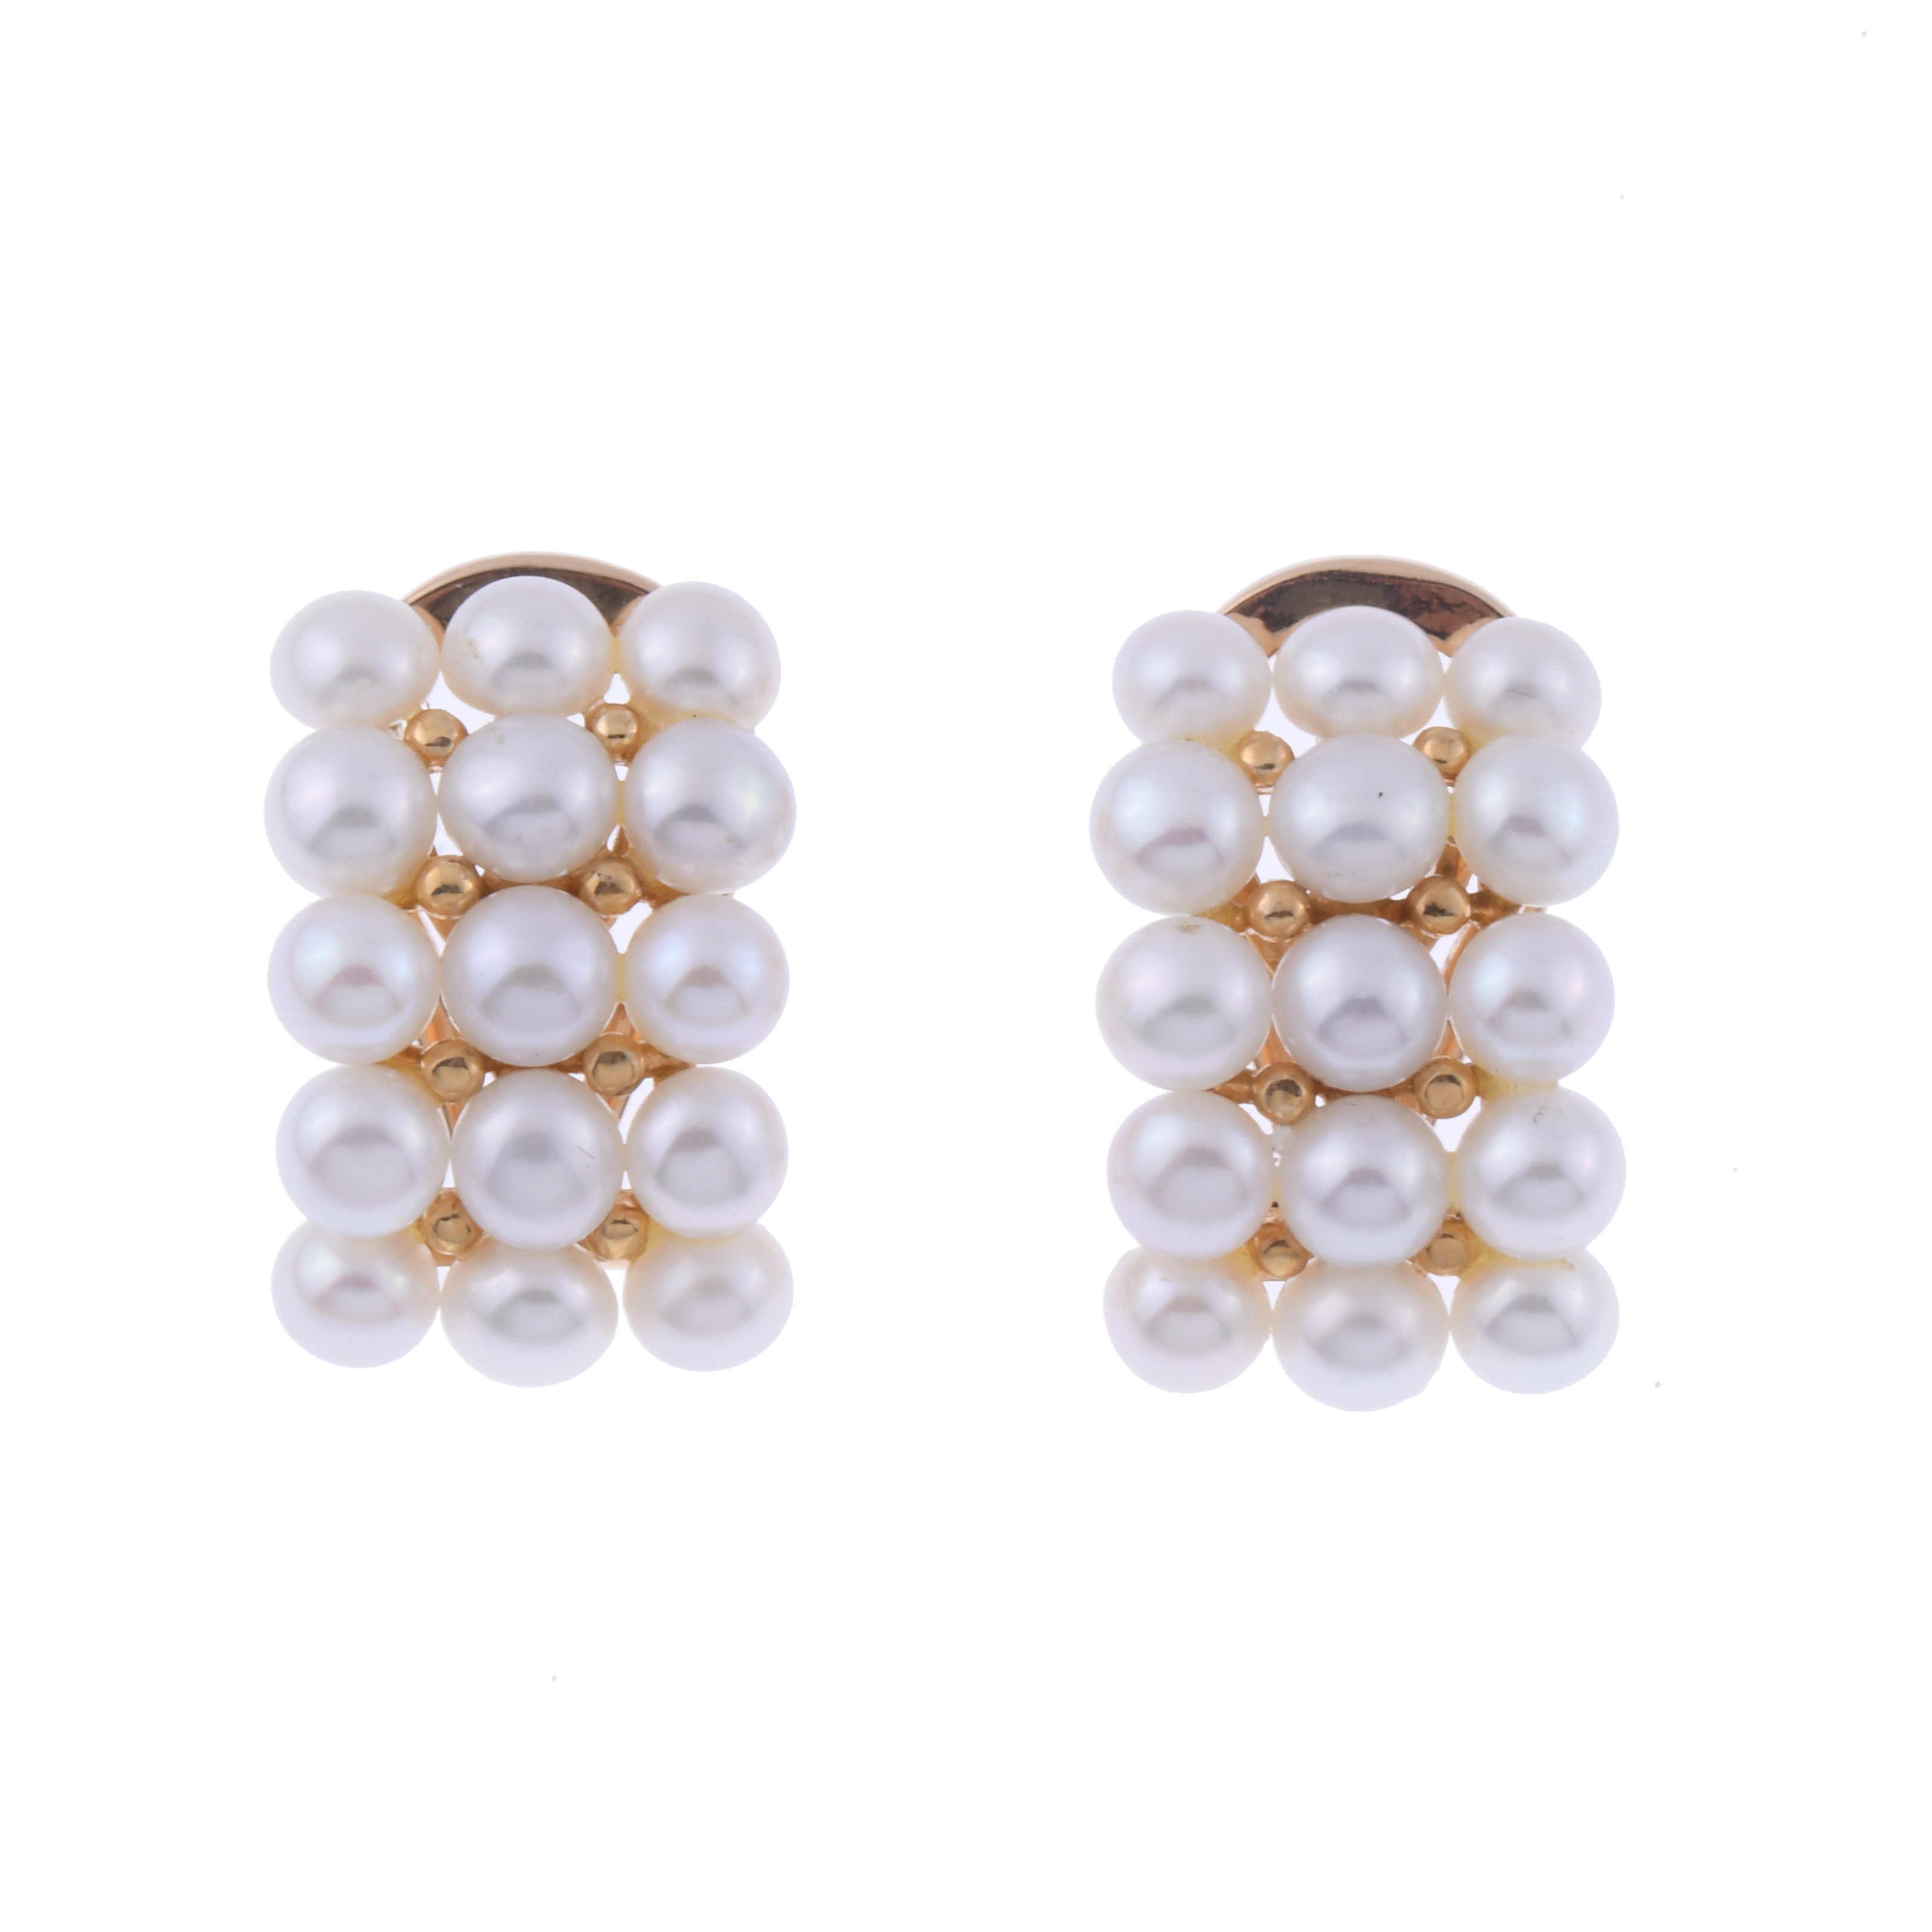 EARRINGS WITH PEARLS.